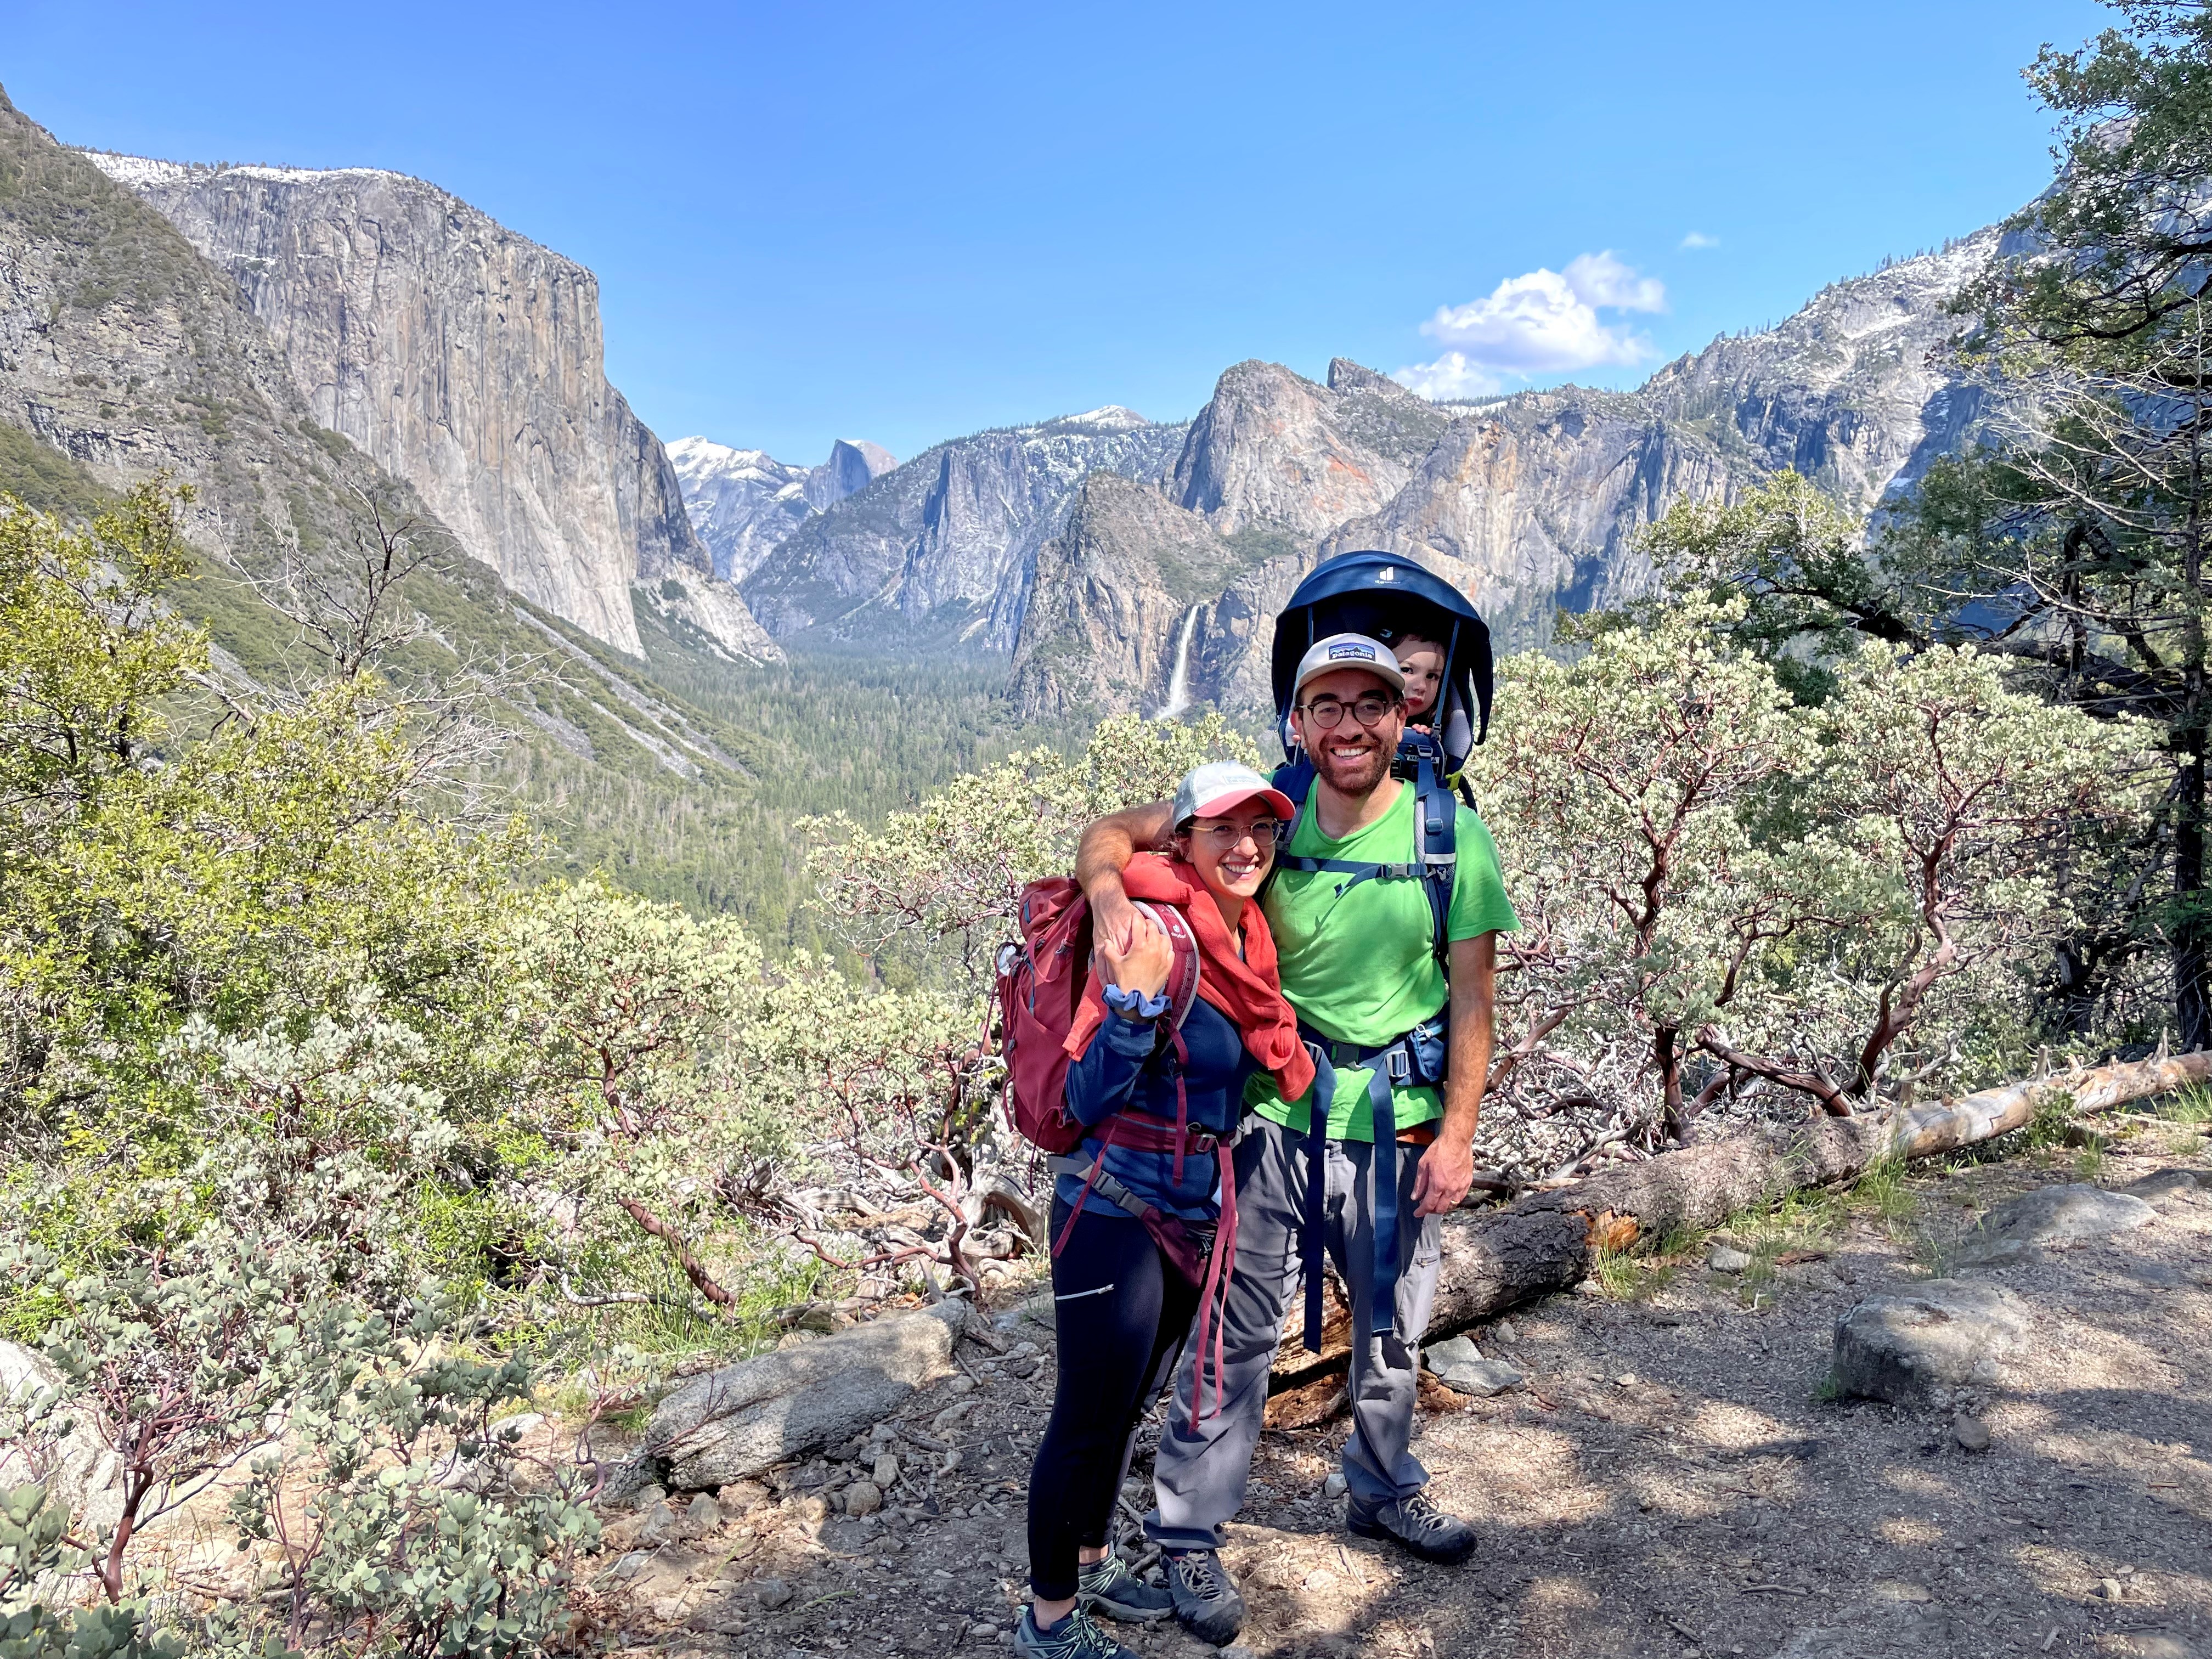 On an excursion to Yosemite National Park with a view of El Capitan and the Half Dome (with “the commander” in the carrier backpack